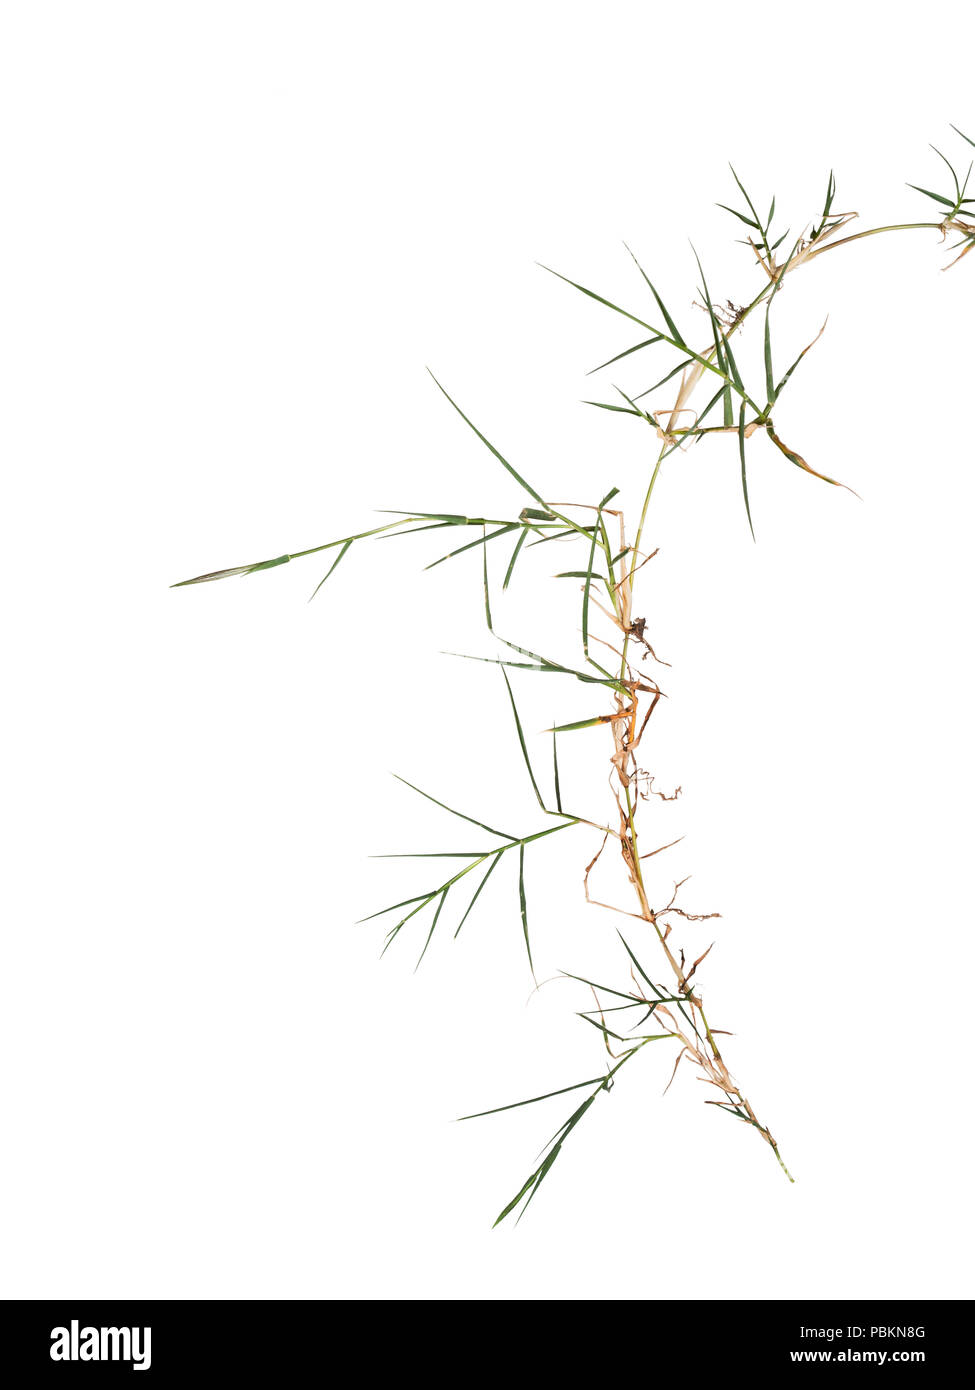 Couch aka twitch grass Elymus repens. invasive weed hated by gardeners. Isolated on white. Stock Photo